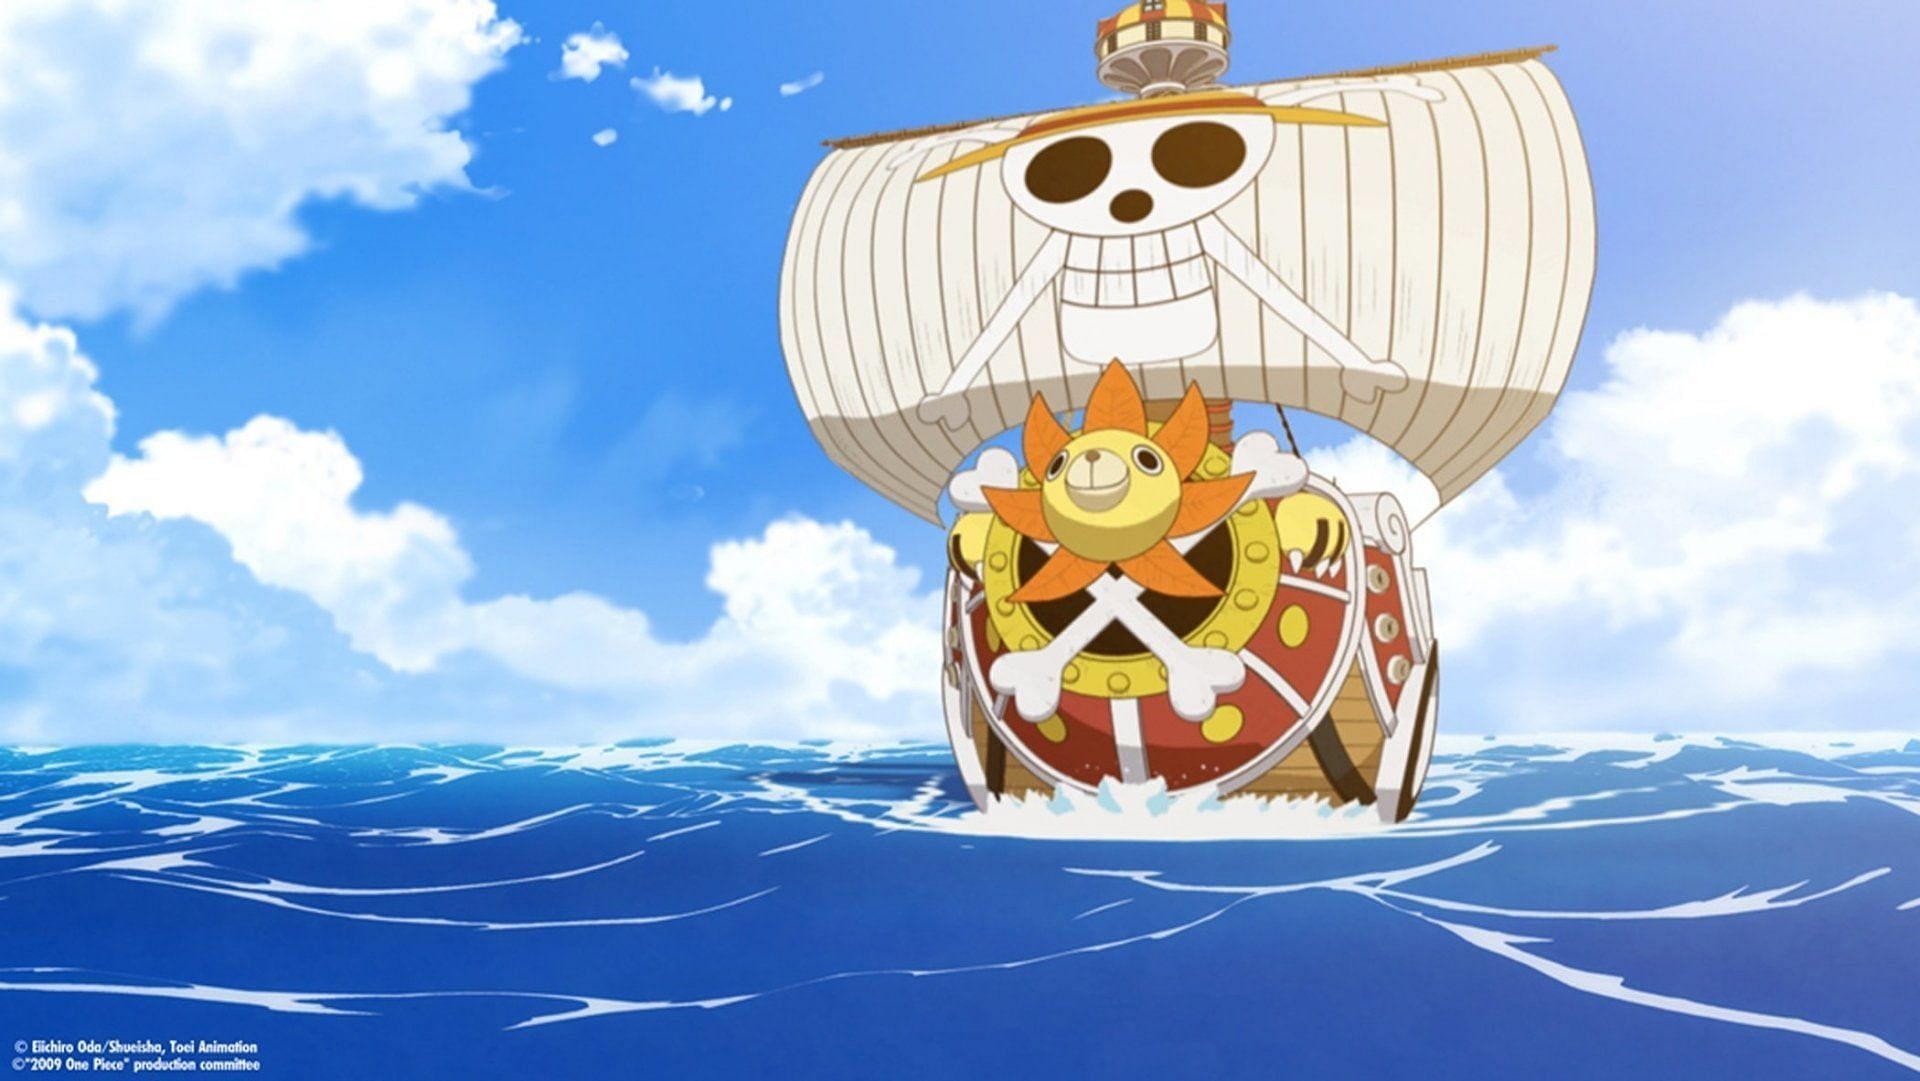 Crunchyroll sets sail to promote One Piece in India